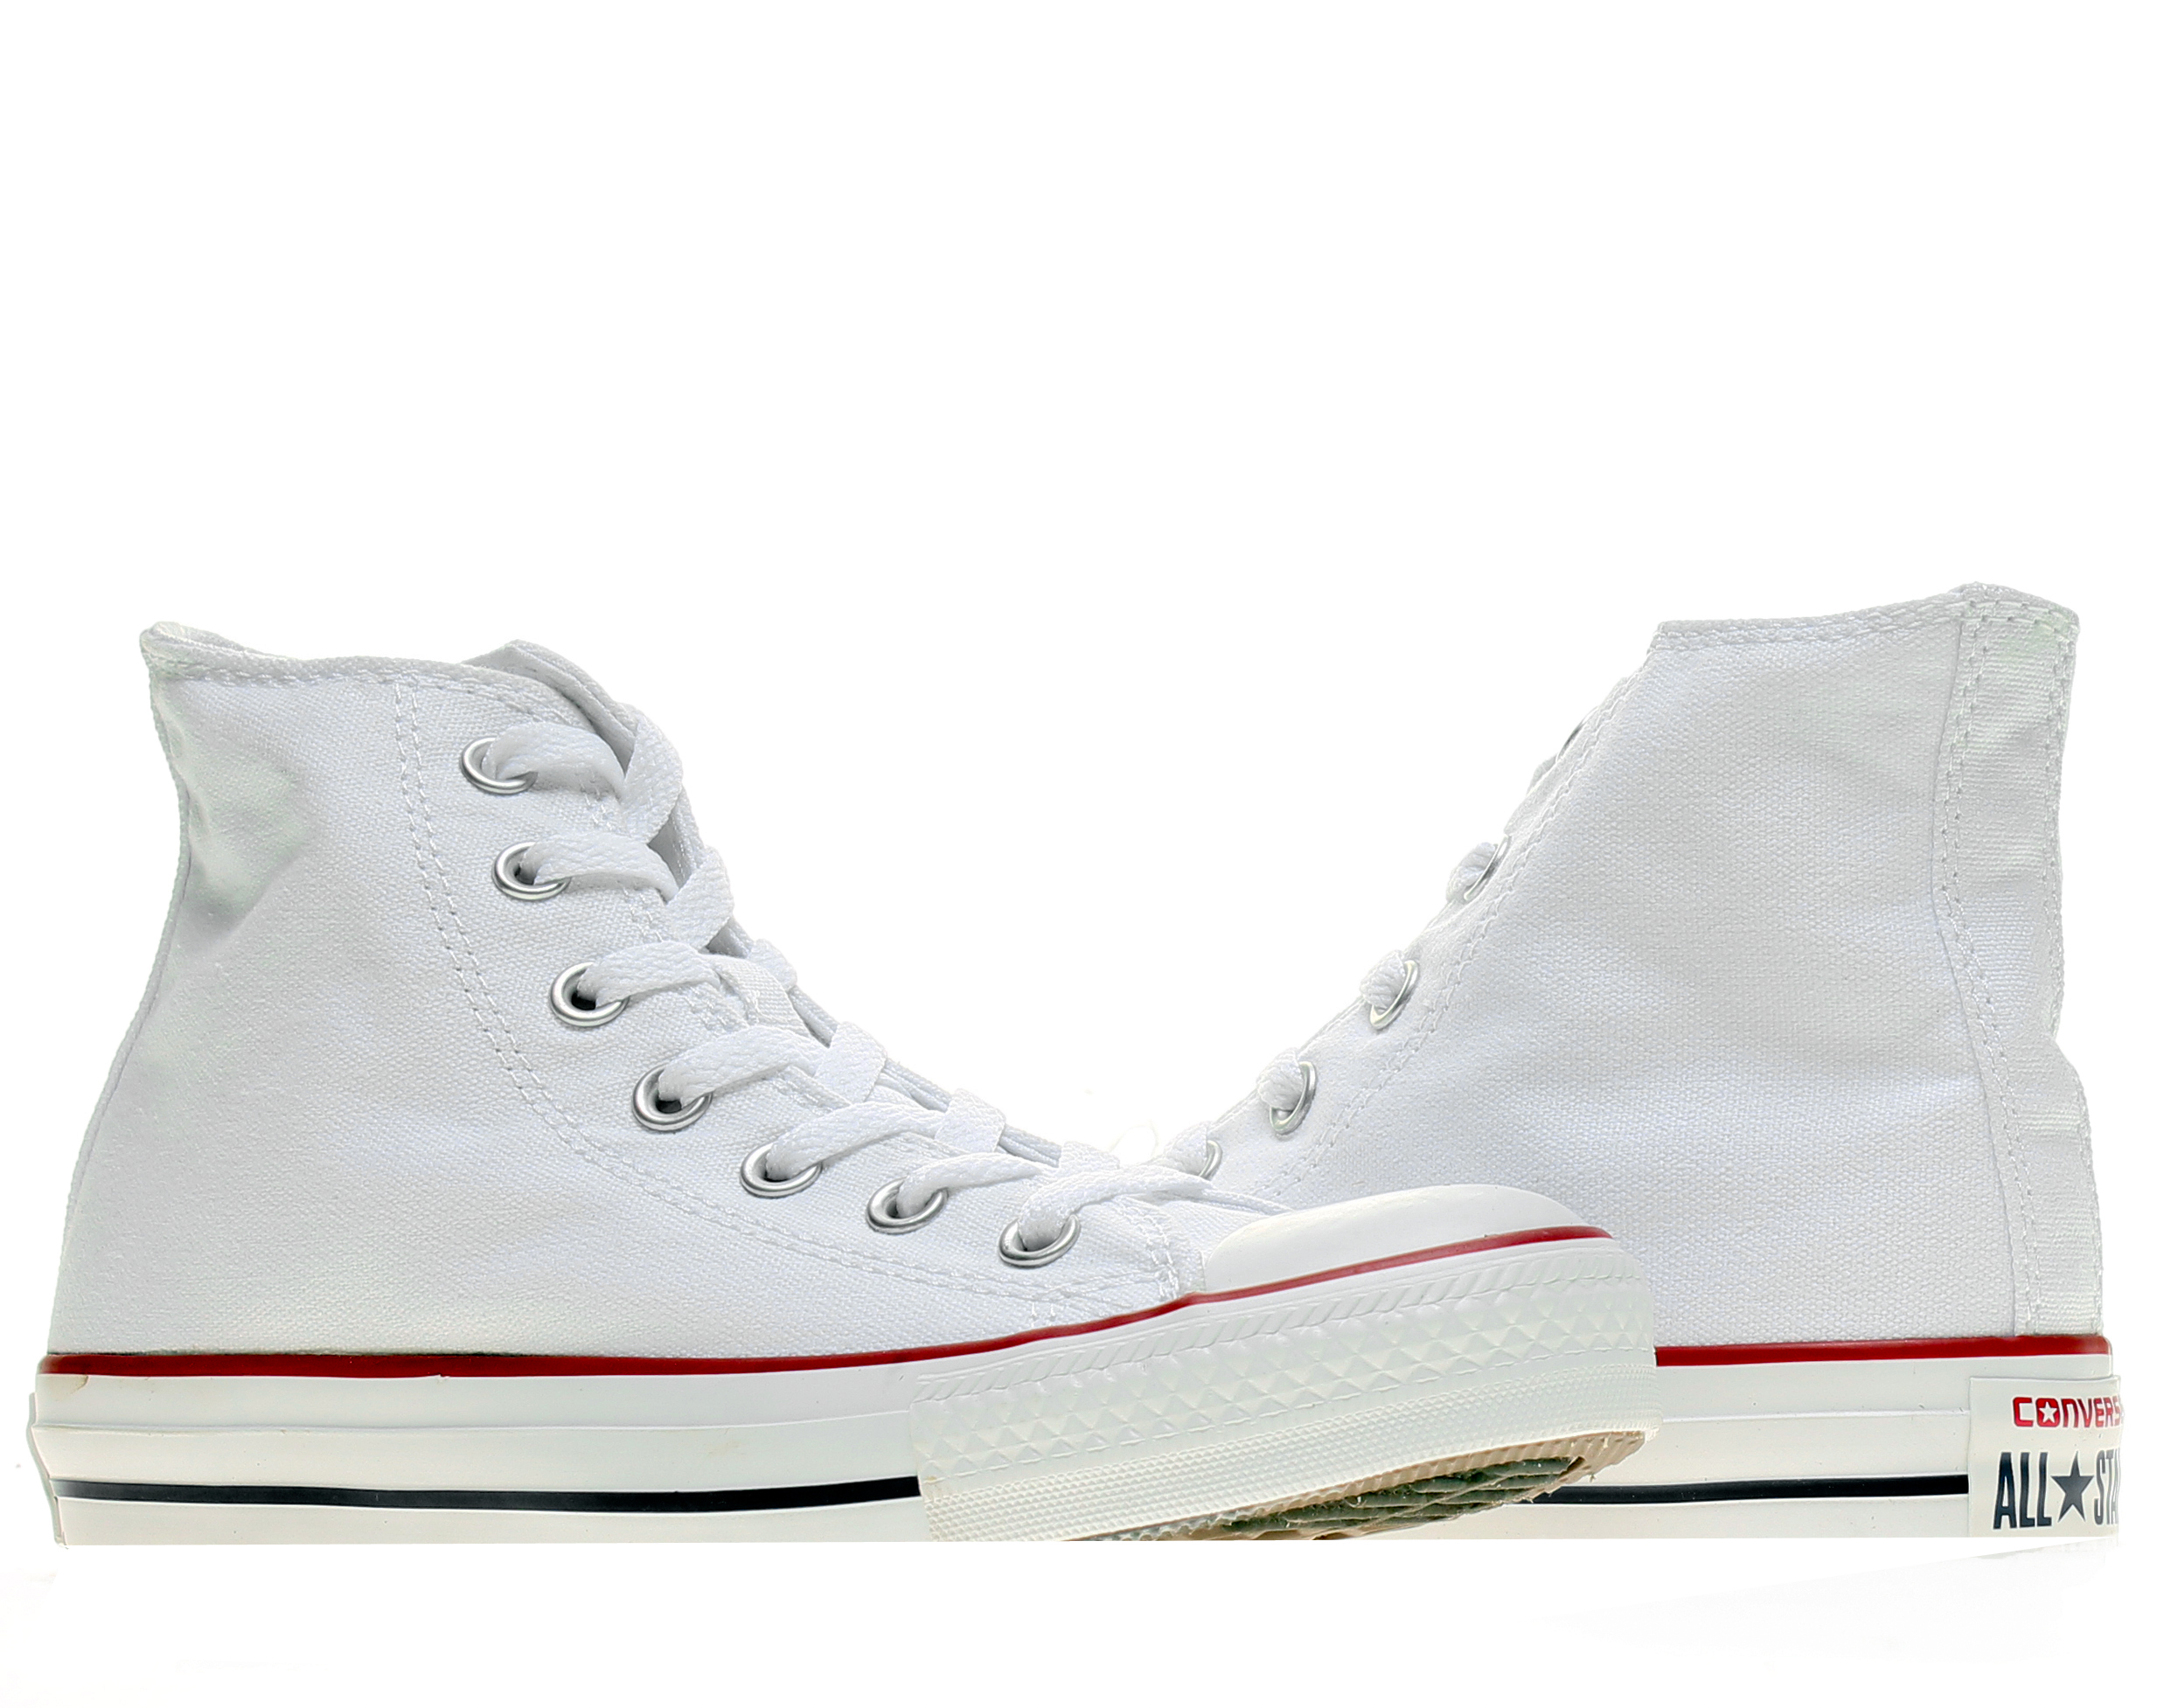 Converse Unisex Chuck Taylor All Star High Top - image 1 of 7